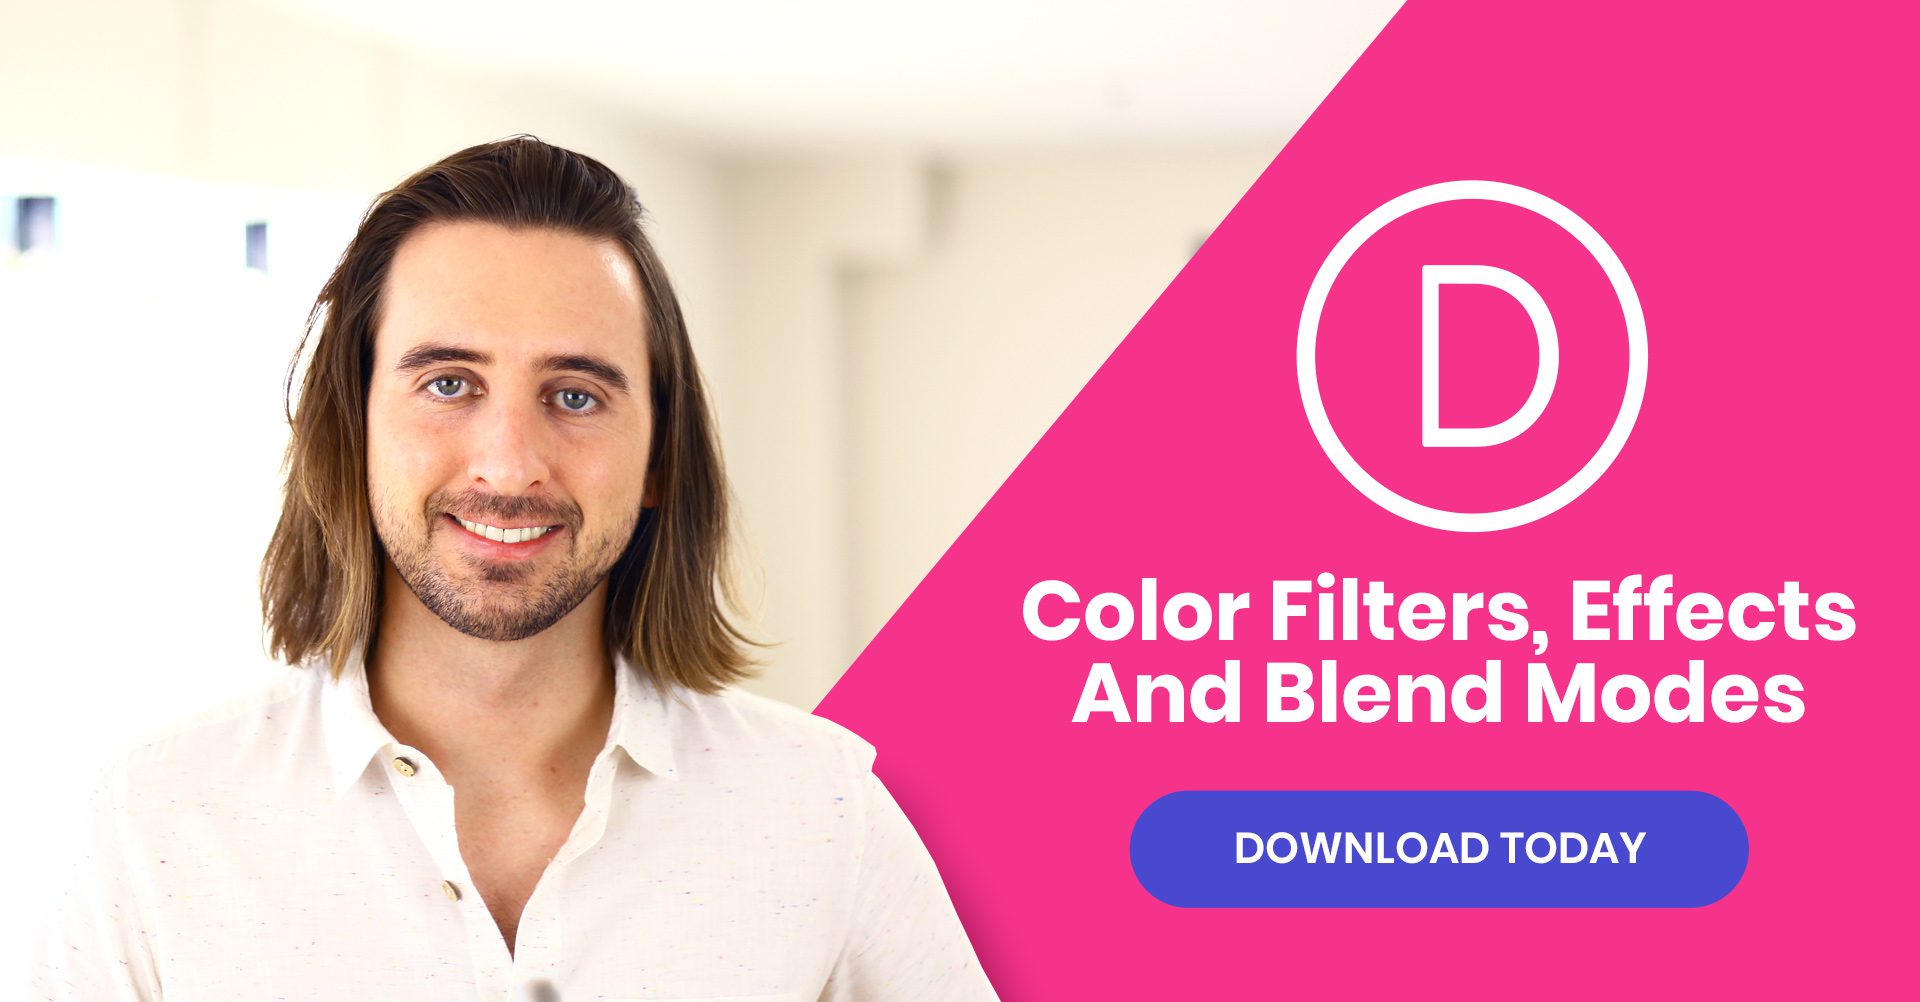 Divi Feature Update! Introducing Color Filters, Effects And Blend Modes For All Images, Modules, Rows and Sections